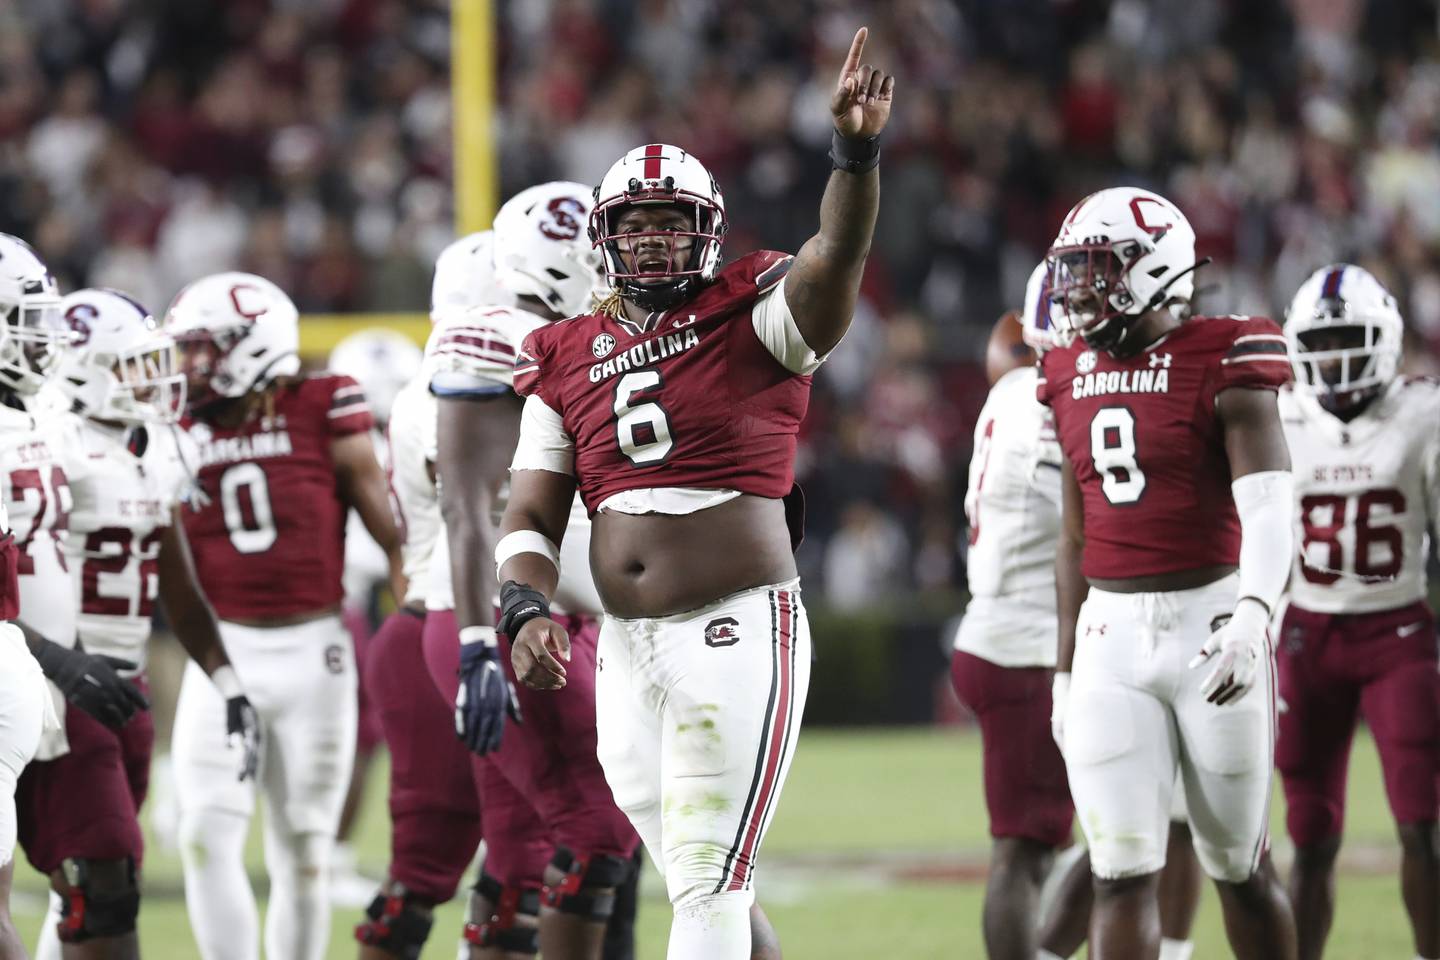 South Carolina defensive lineman Zacch Pickens gestures after a stop against South Carolina State during the 2022 season in Columbia, S.C.